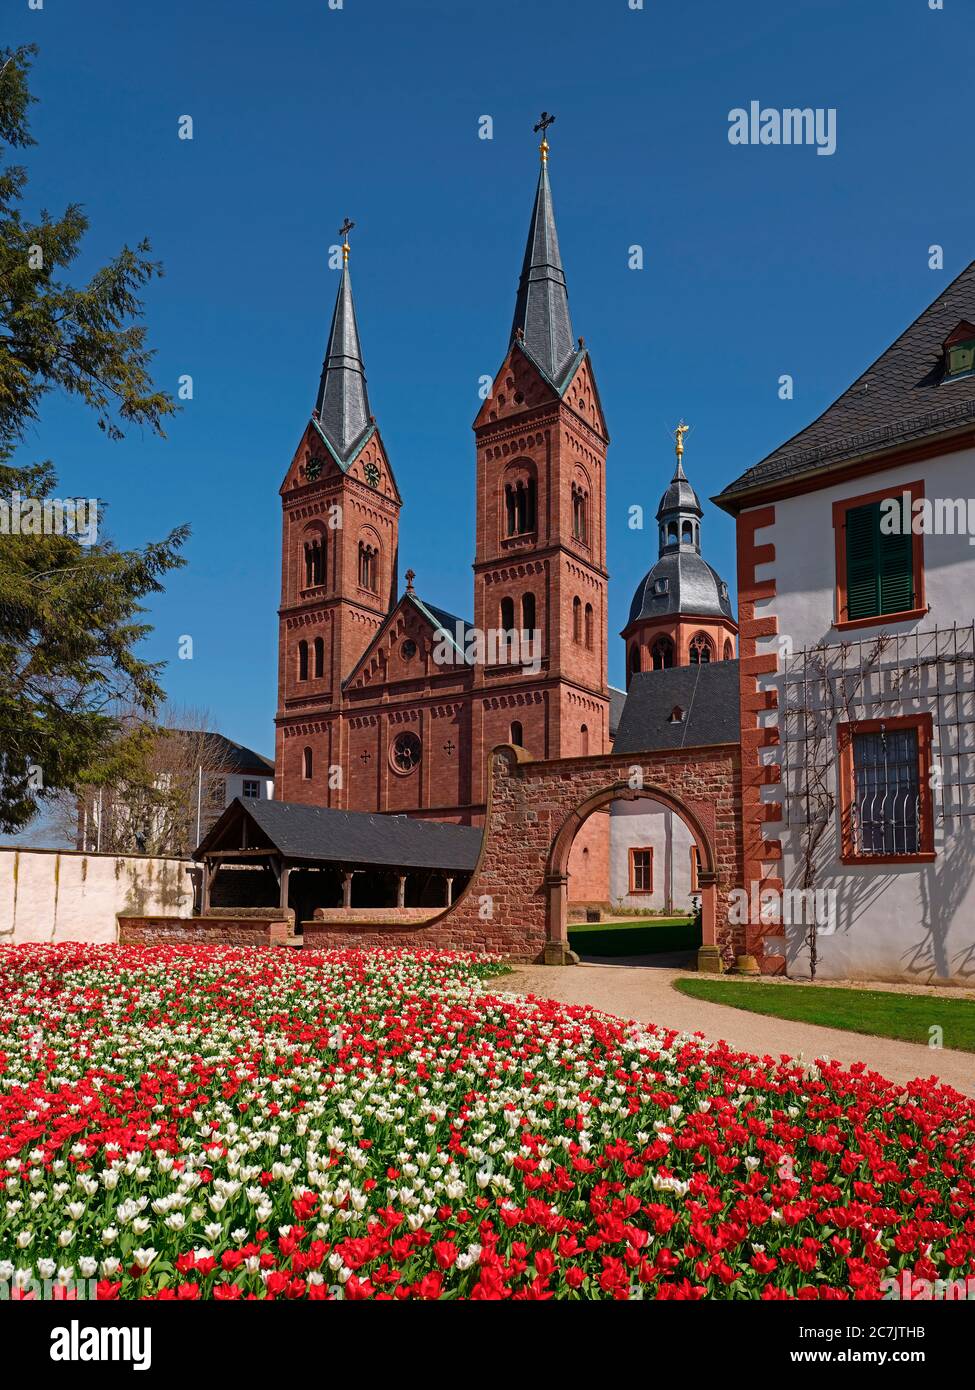 Church of St. Marcellinus and Petrus, view from the southwest, Einhard basilica, white and red tulips, Seligenstadt, Hessen, Germany Stock Photo